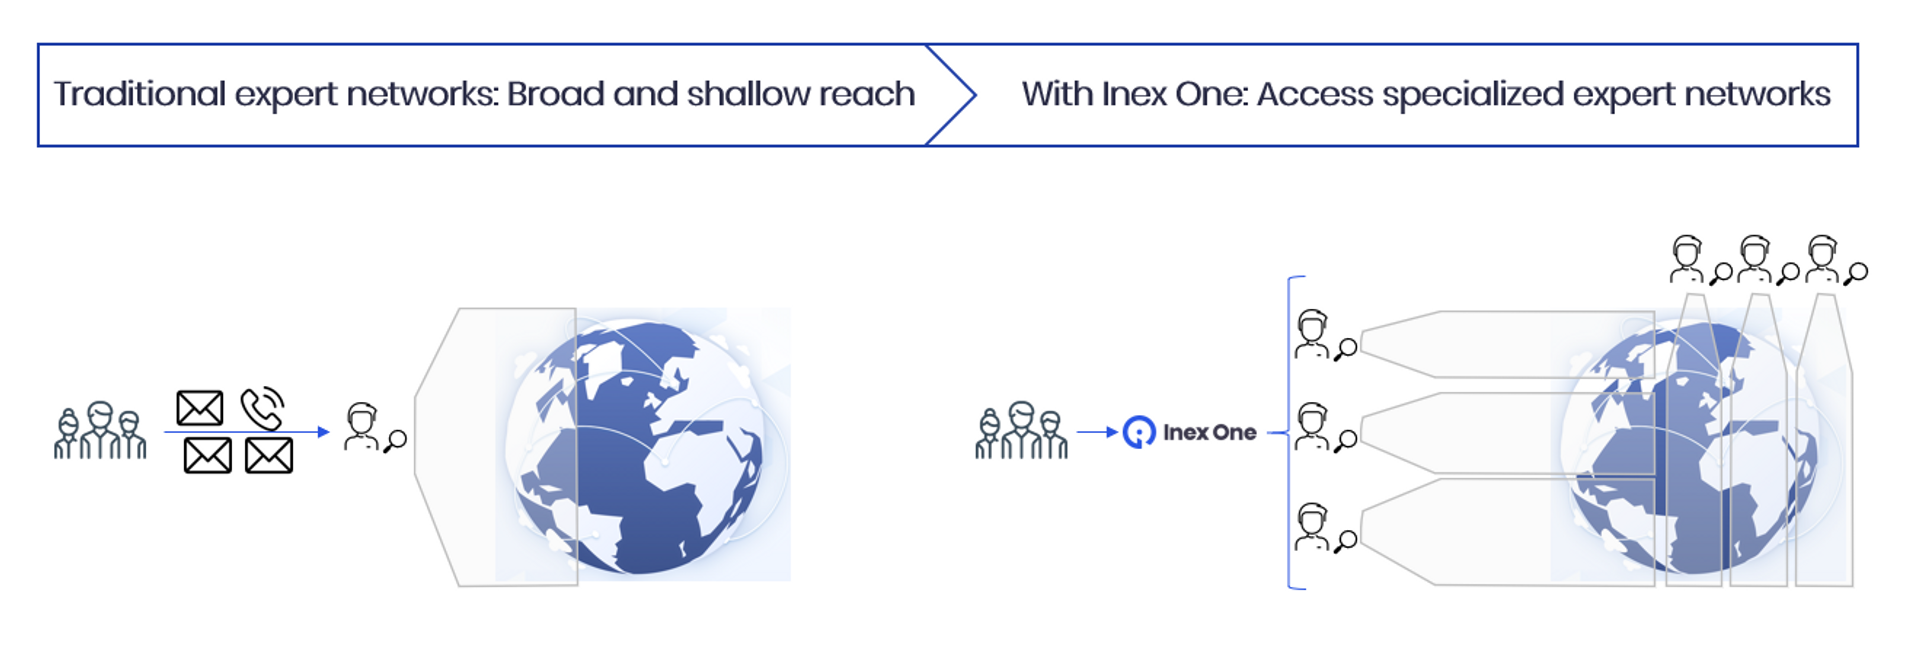 Image illustrating how clients access specialized expert networks with Inex One